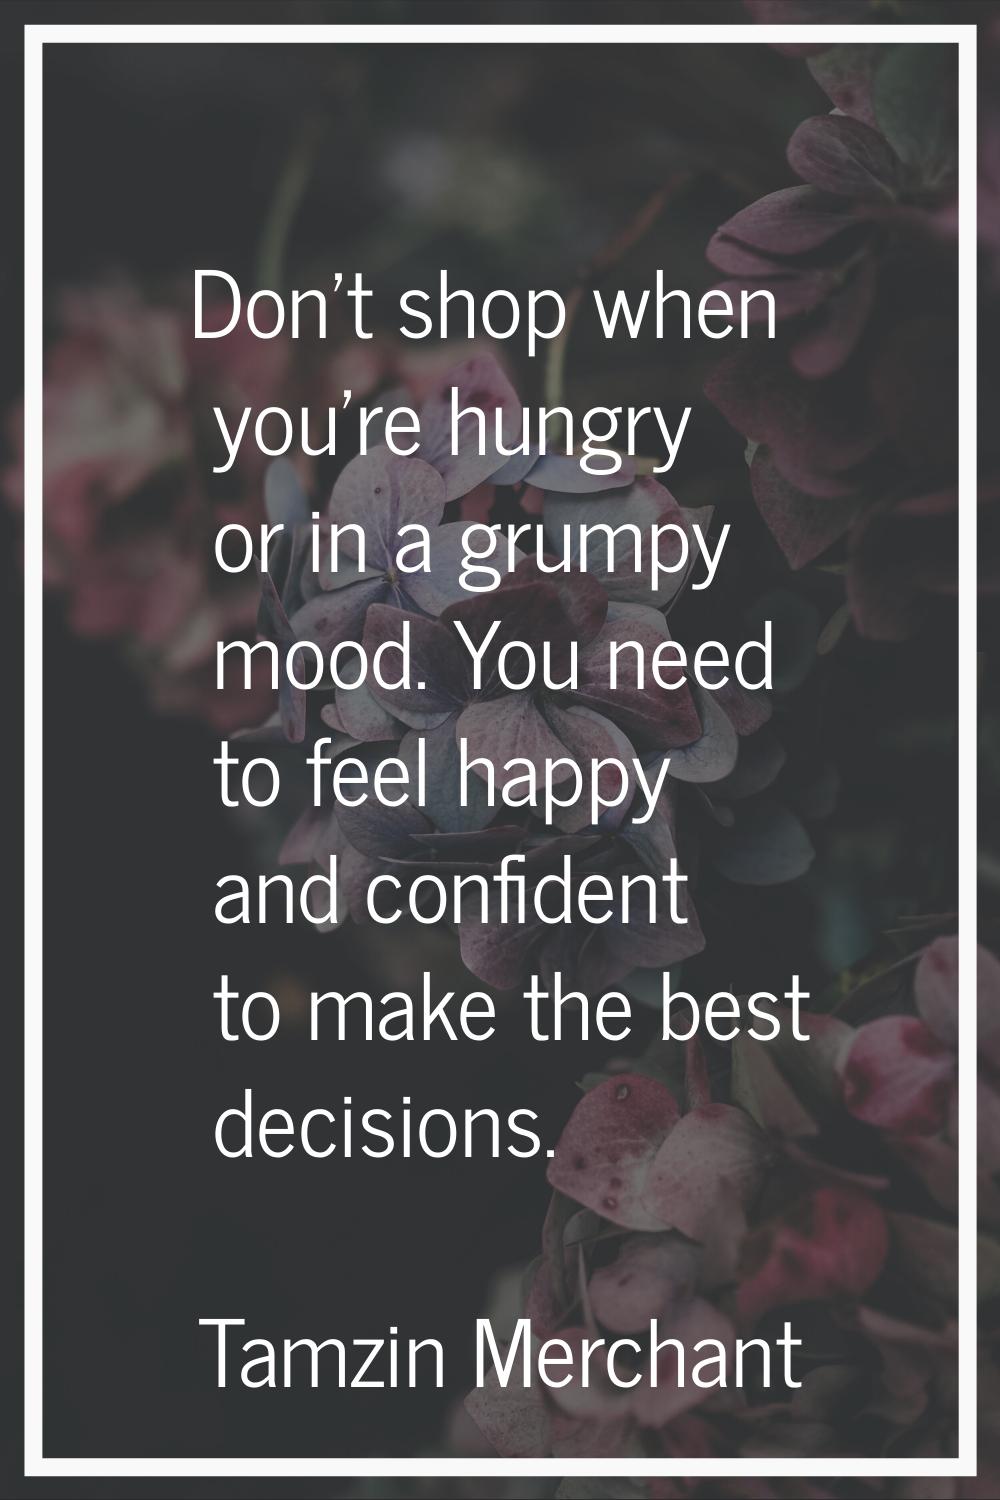 Don't shop when you're hungry or in a grumpy mood. You need to feel happy and confident to make the